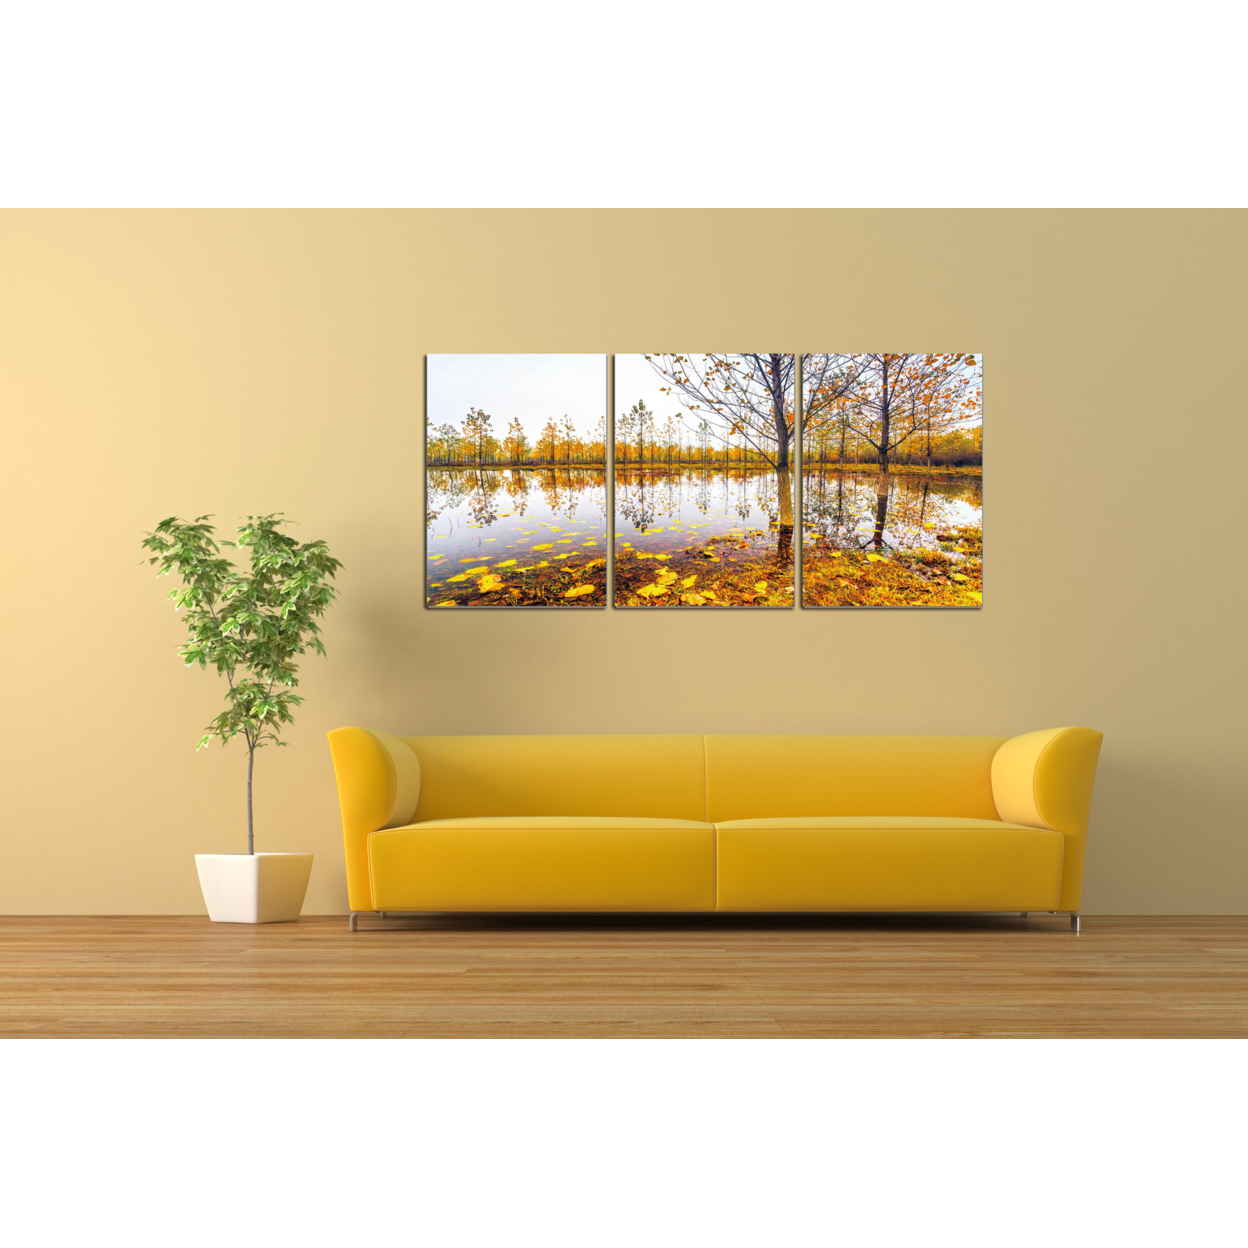 Falling Leaves 3 Piece Wrapped Canvas Wall Art Print 20x40.5 Inches